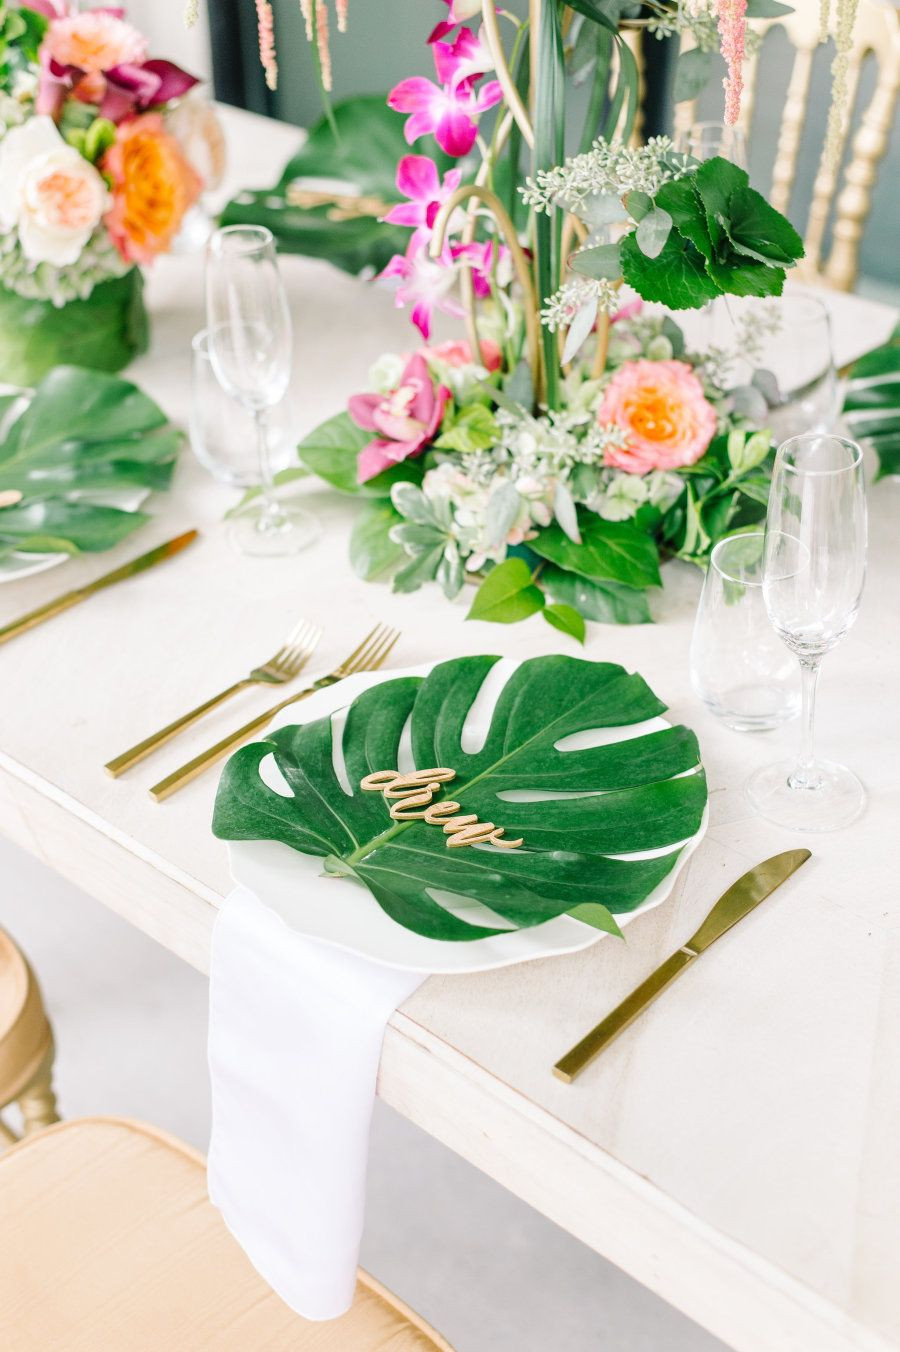 Summer In Winter Party Ideas
 Winter Schminter We re Giving Our Next Brunch a Tropical